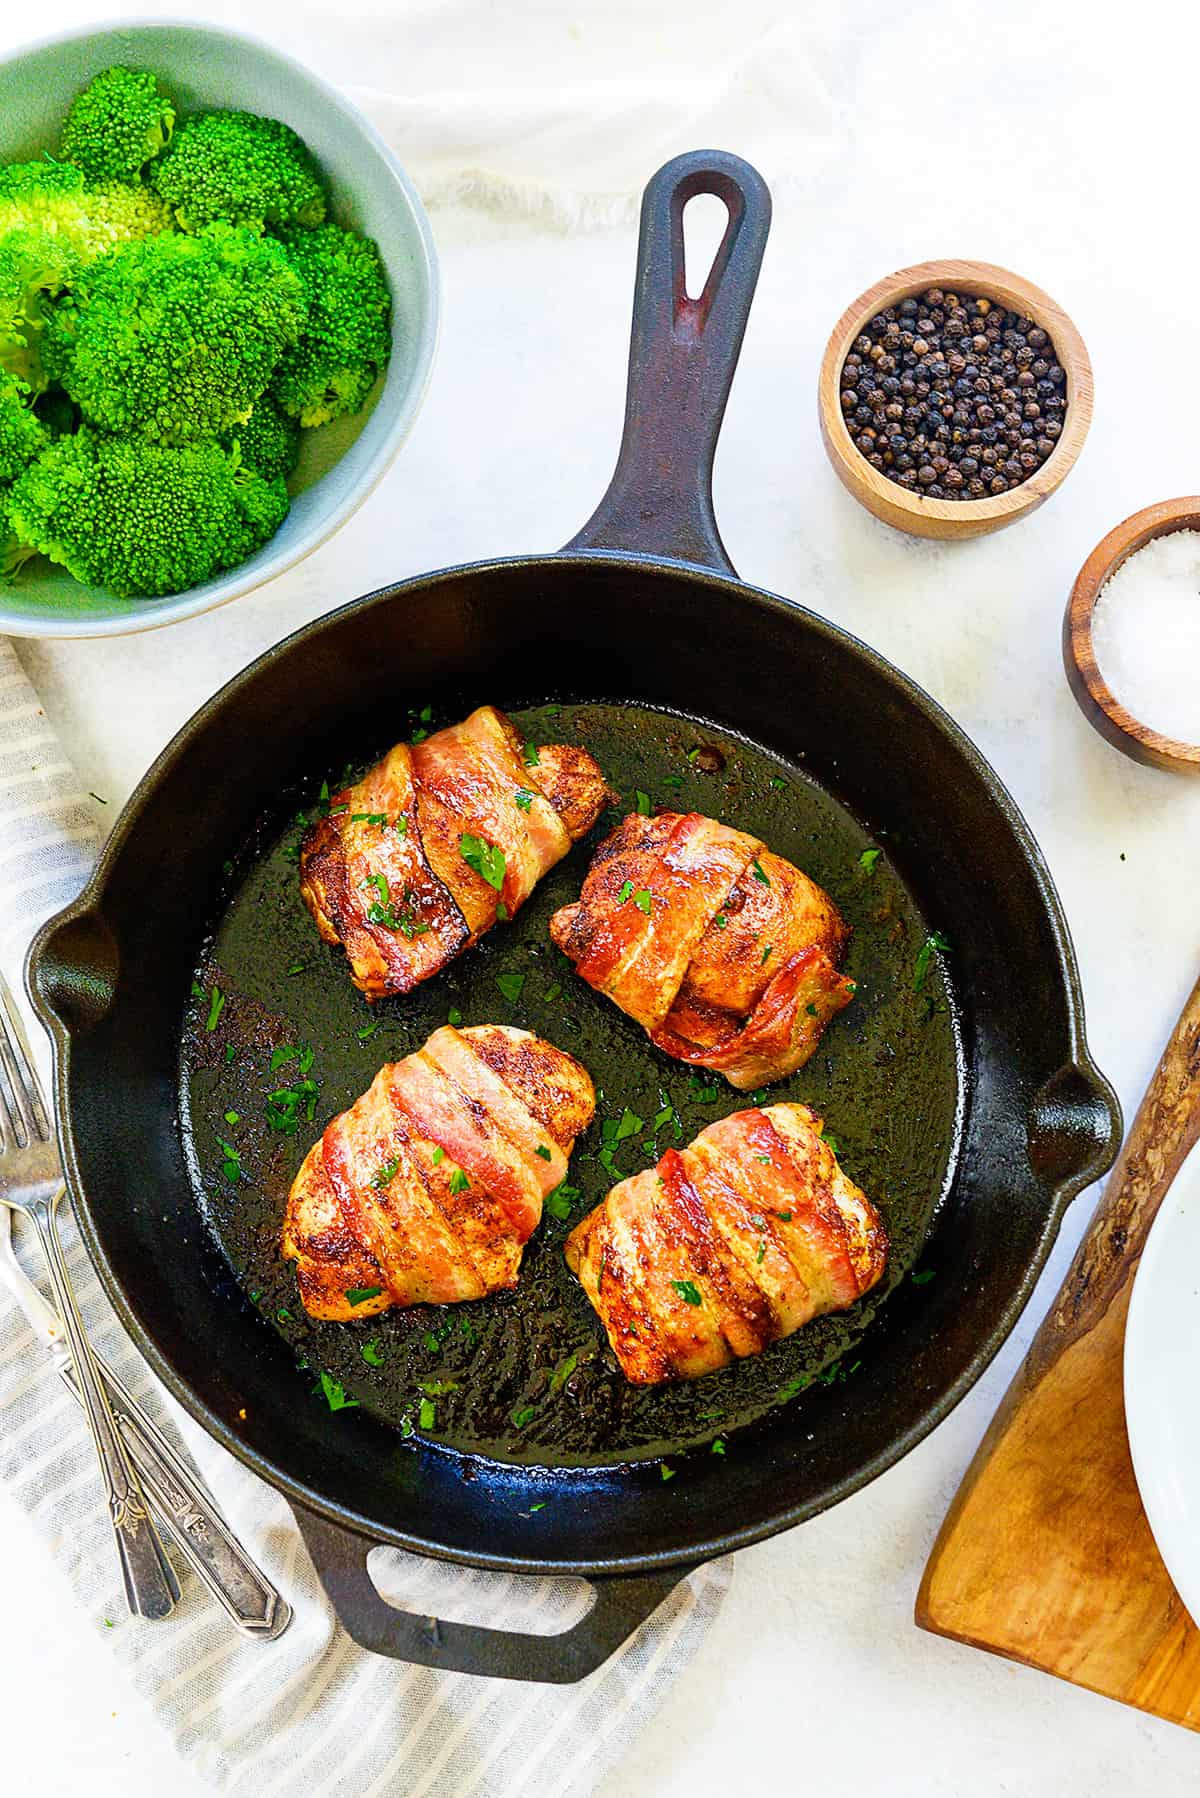 Bacon wrapped chicken thighs in cast iron skillet.